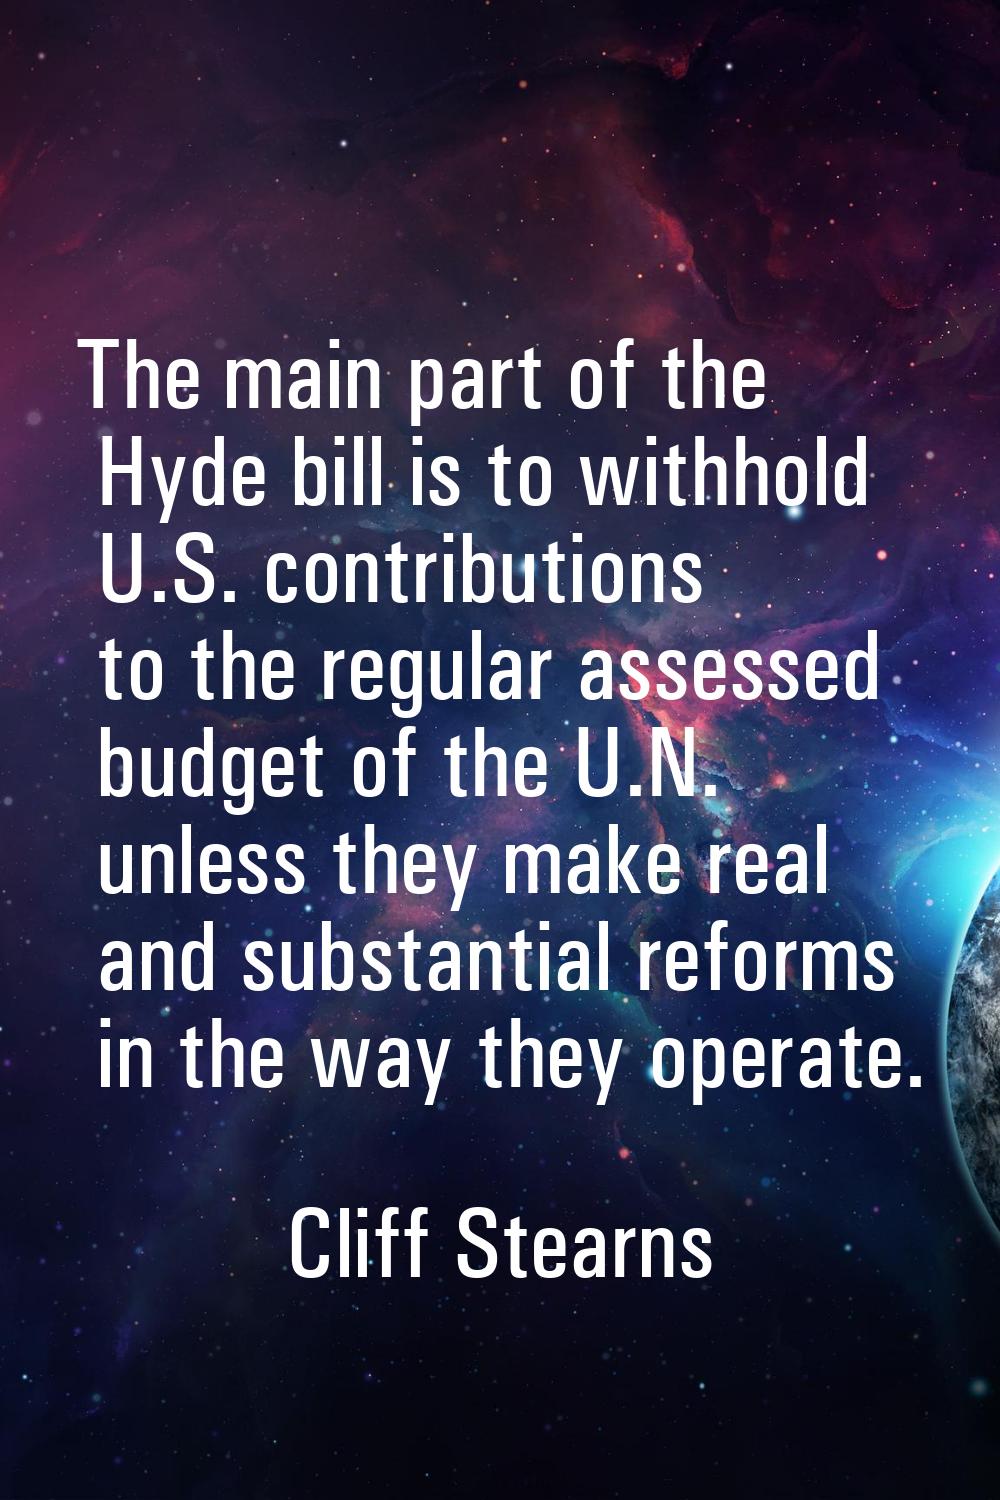 The main part of the Hyde bill is to withhold U.S. contributions to the regular assessed budget of 